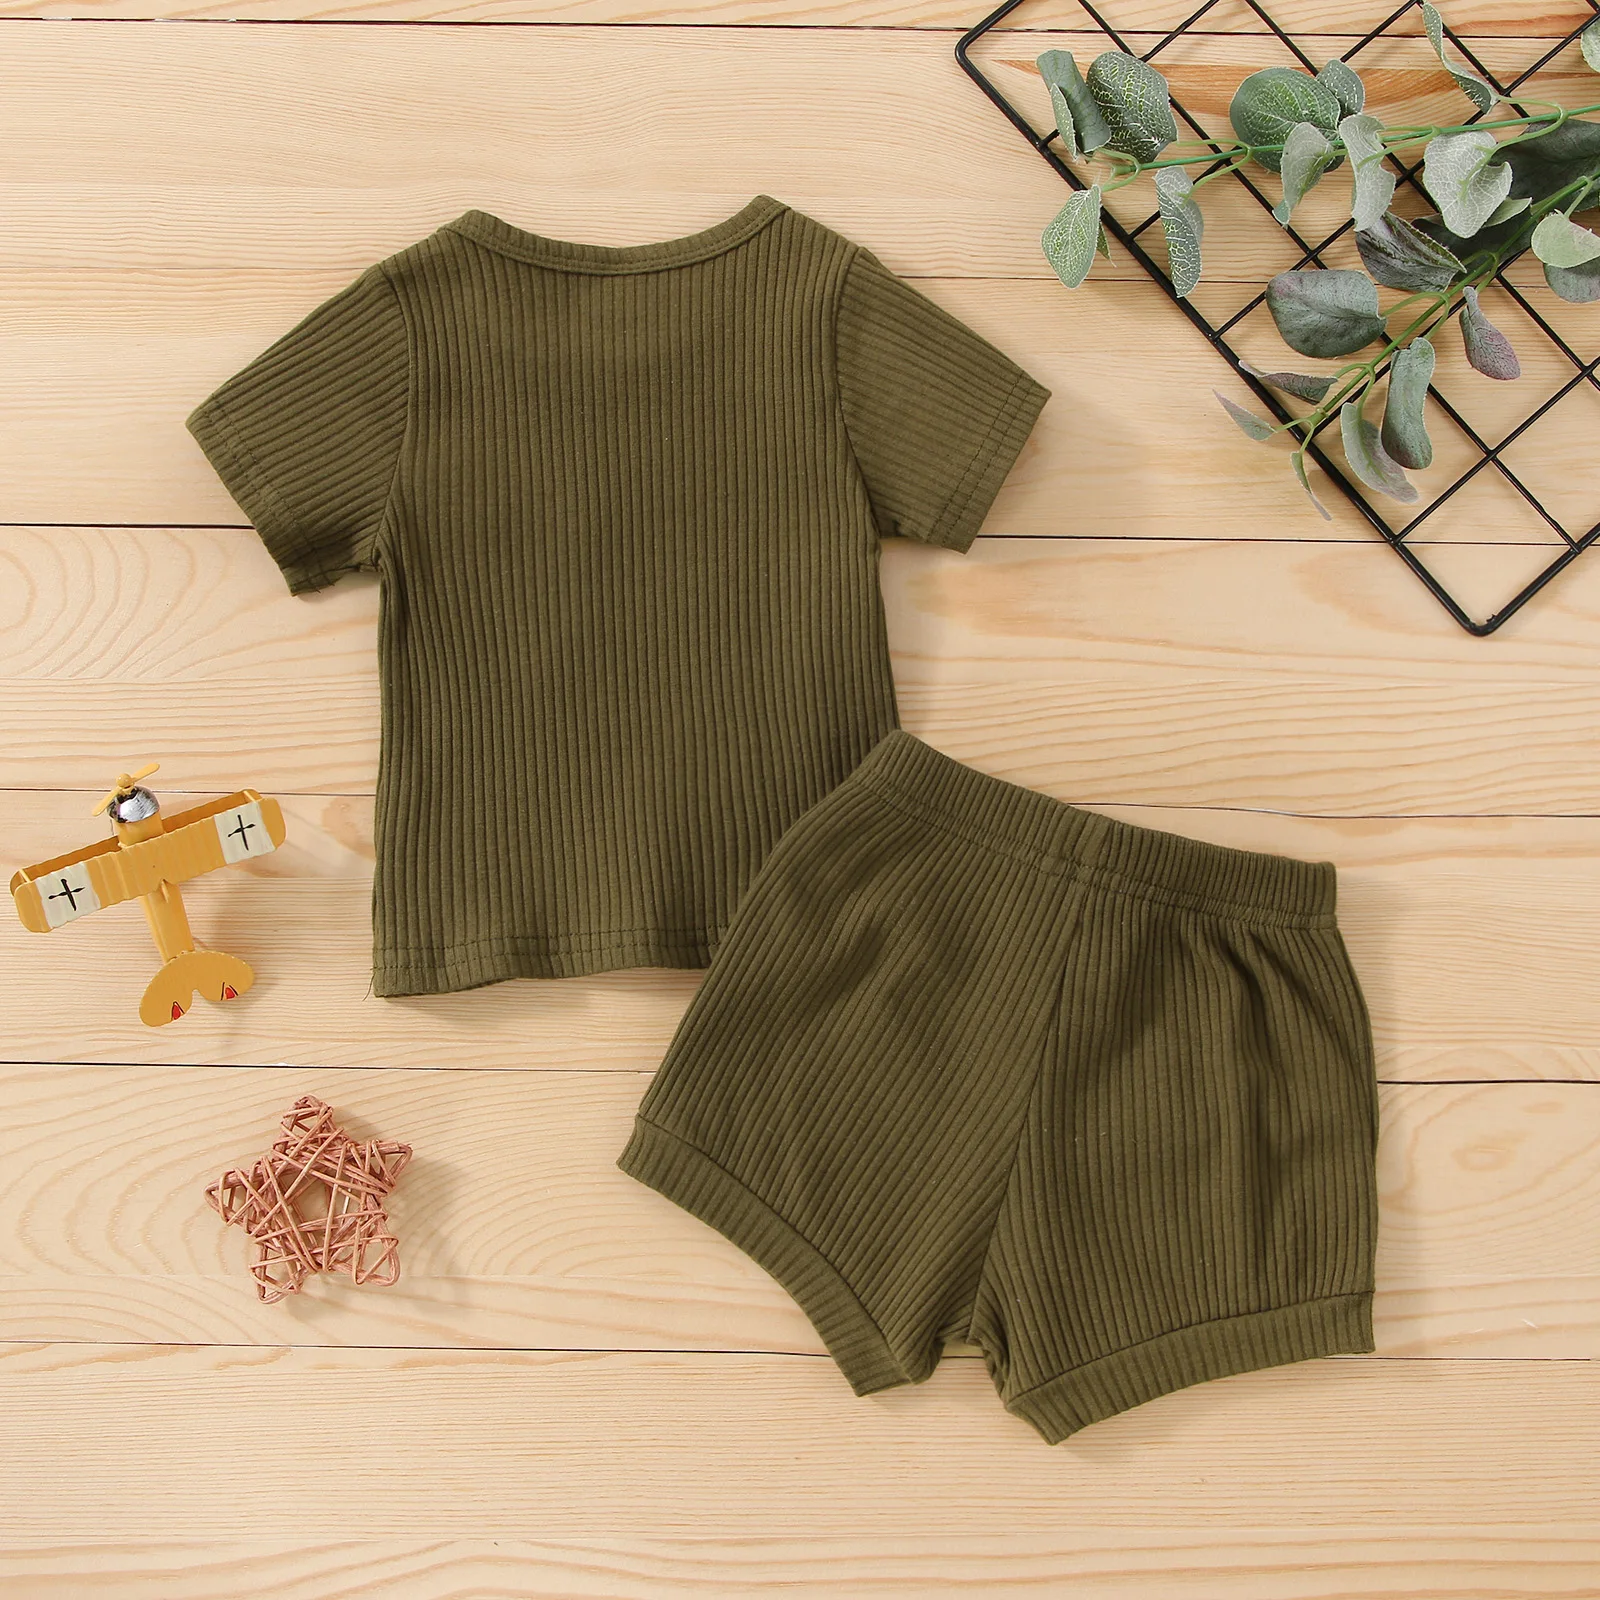 Lioraitiin 0-24M Newborn Infant Baby Girl Boy Outfits Sets Ribbed Knit Short Sleeve T-shirt Short Pant Solid Color Clothes Set Baby Clothing Set cheap